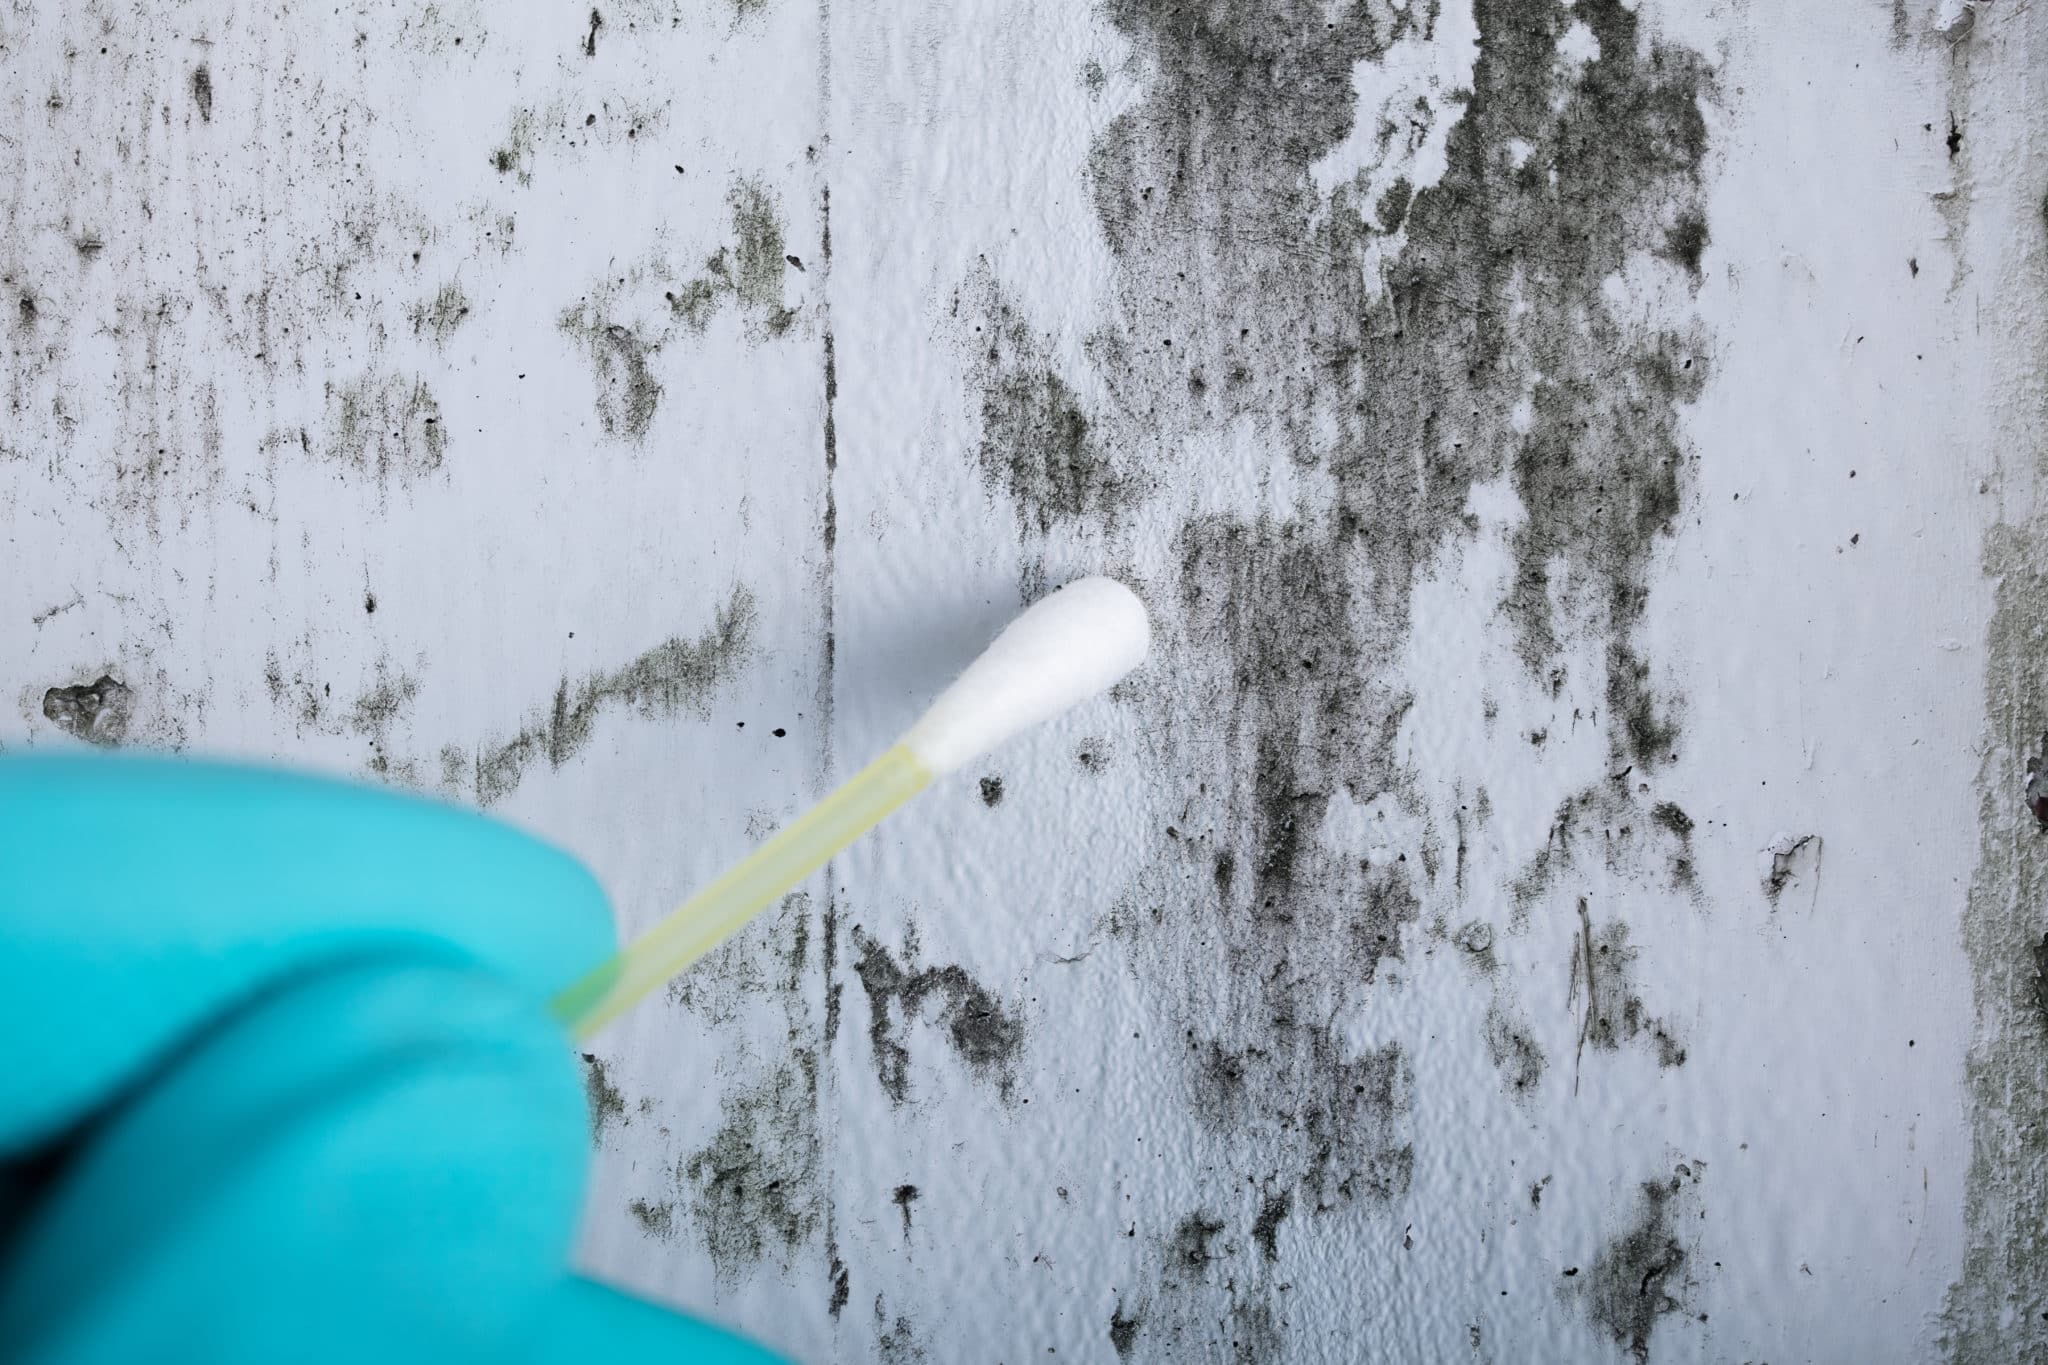 Doe your building inspector check for mold?